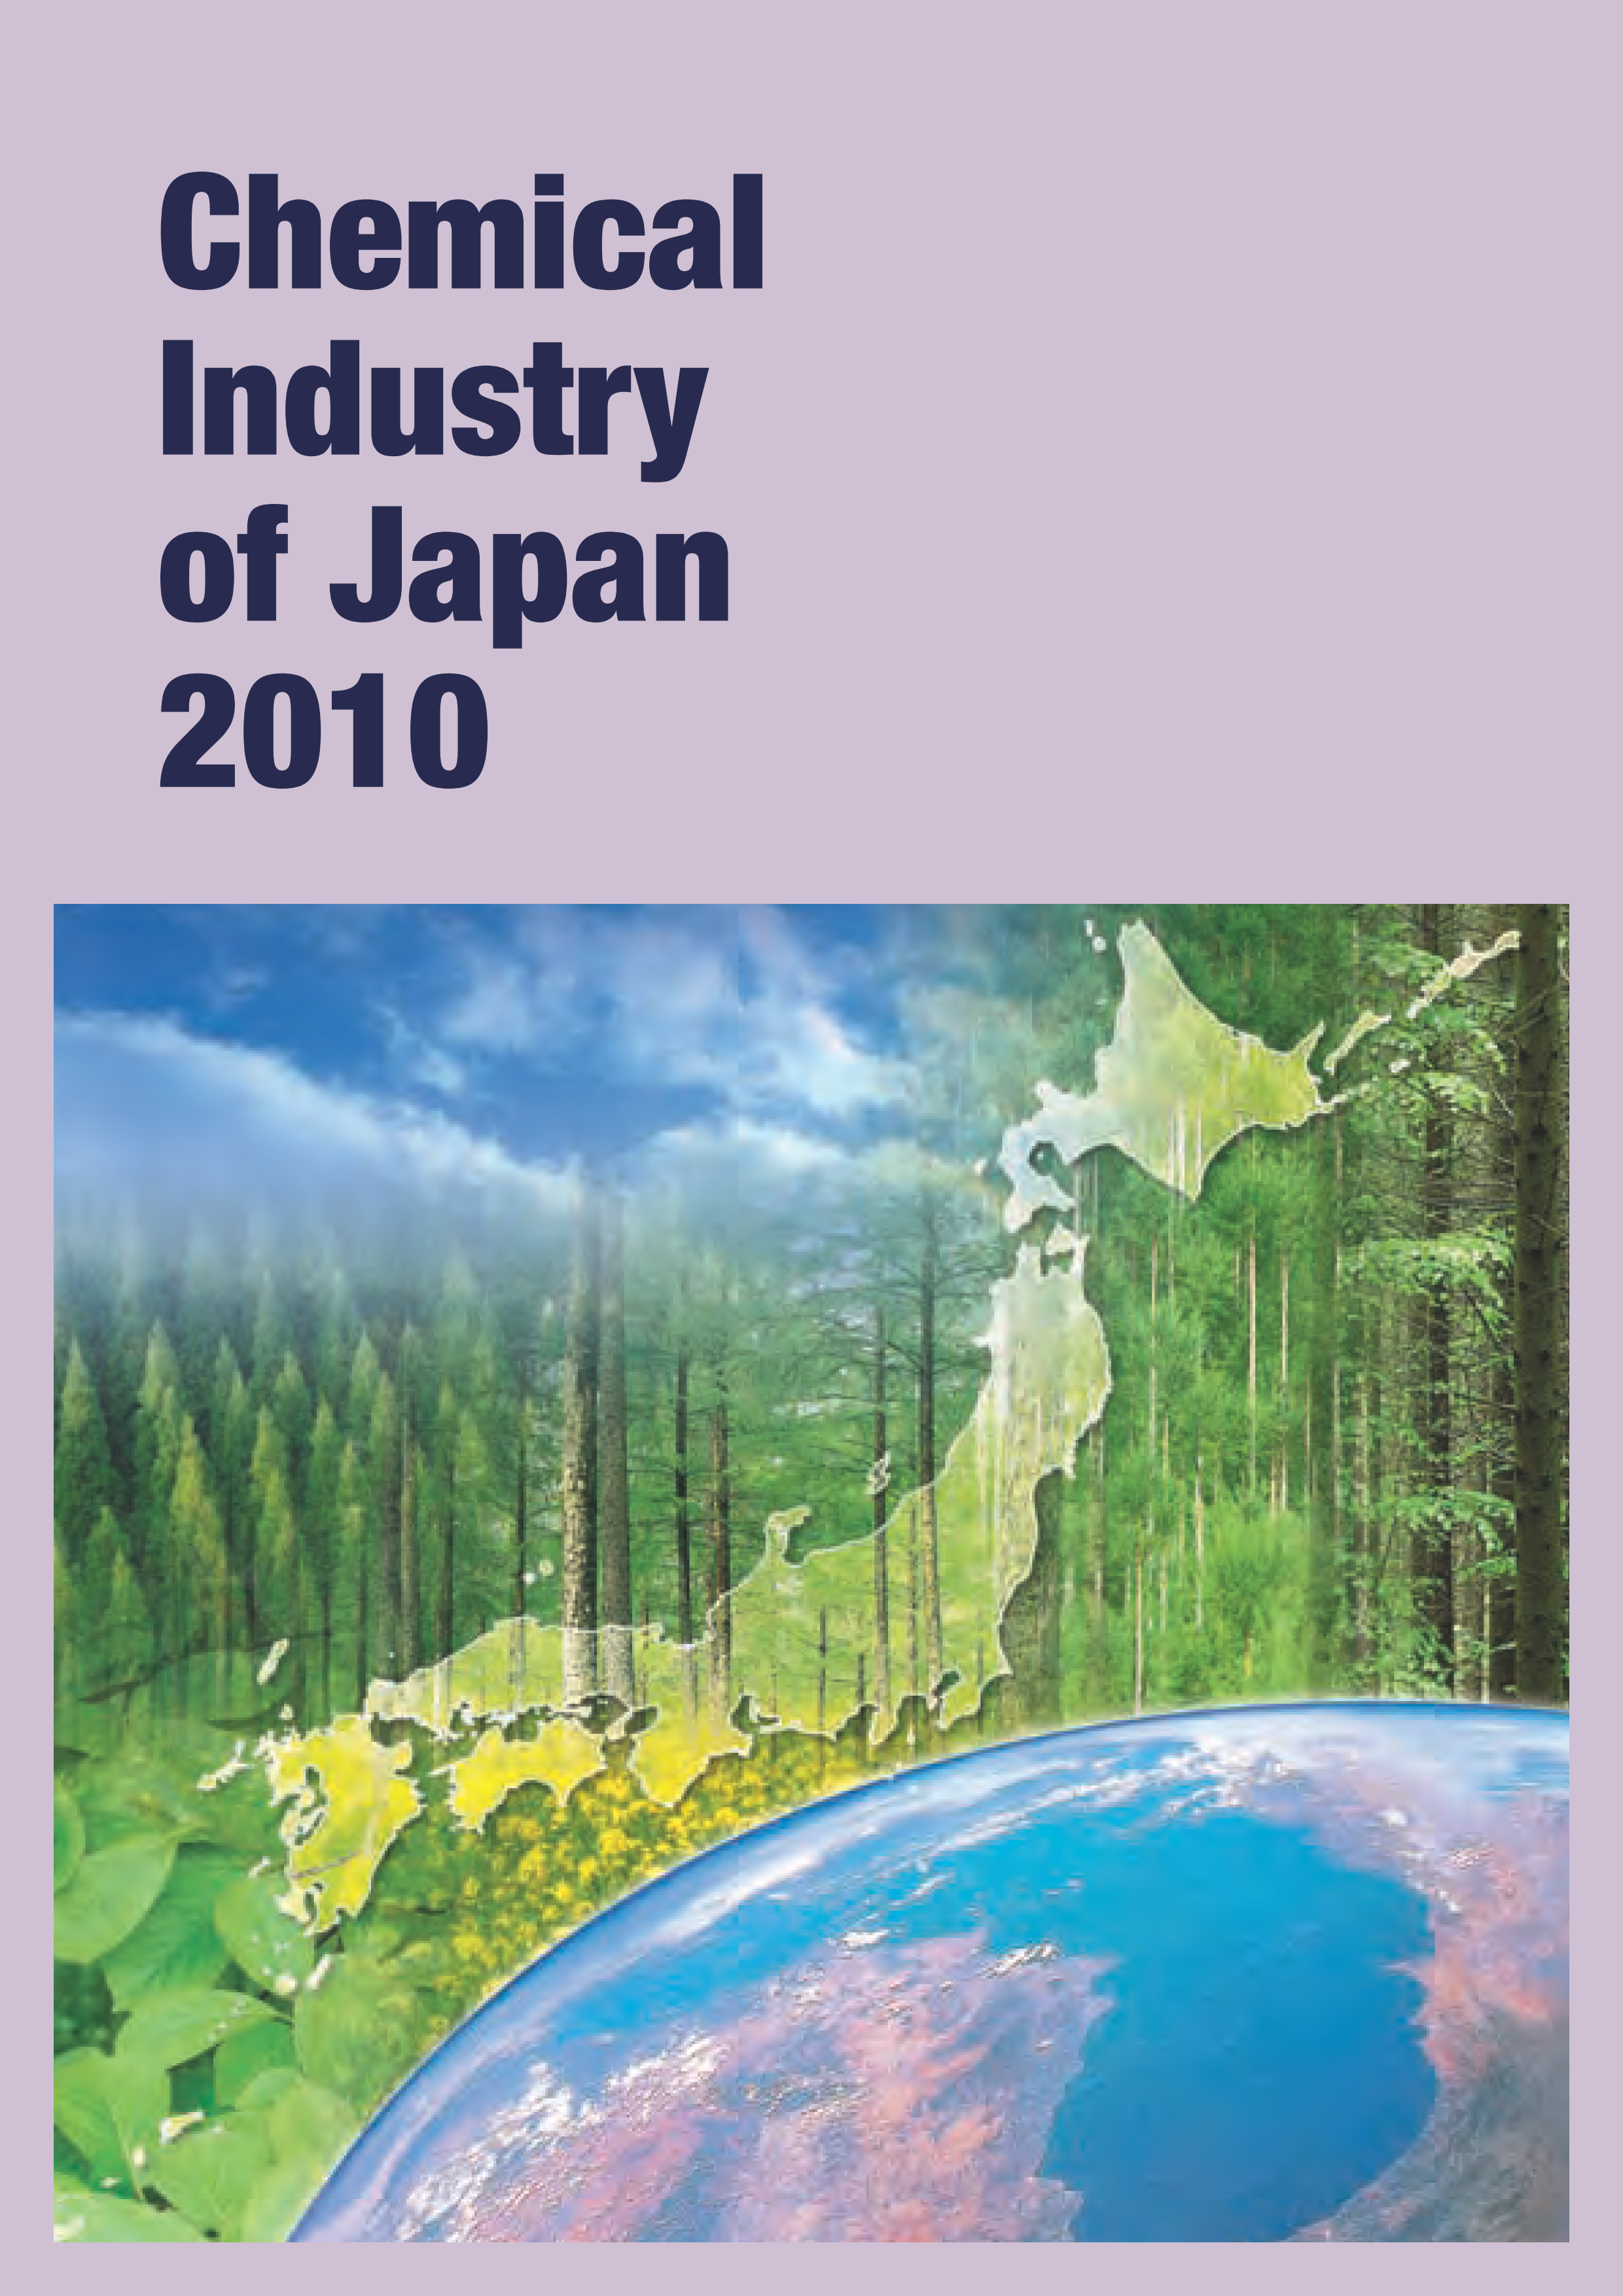 2010 CHEMICAL INDUSTRY OF JAPAN IN GRAPHS